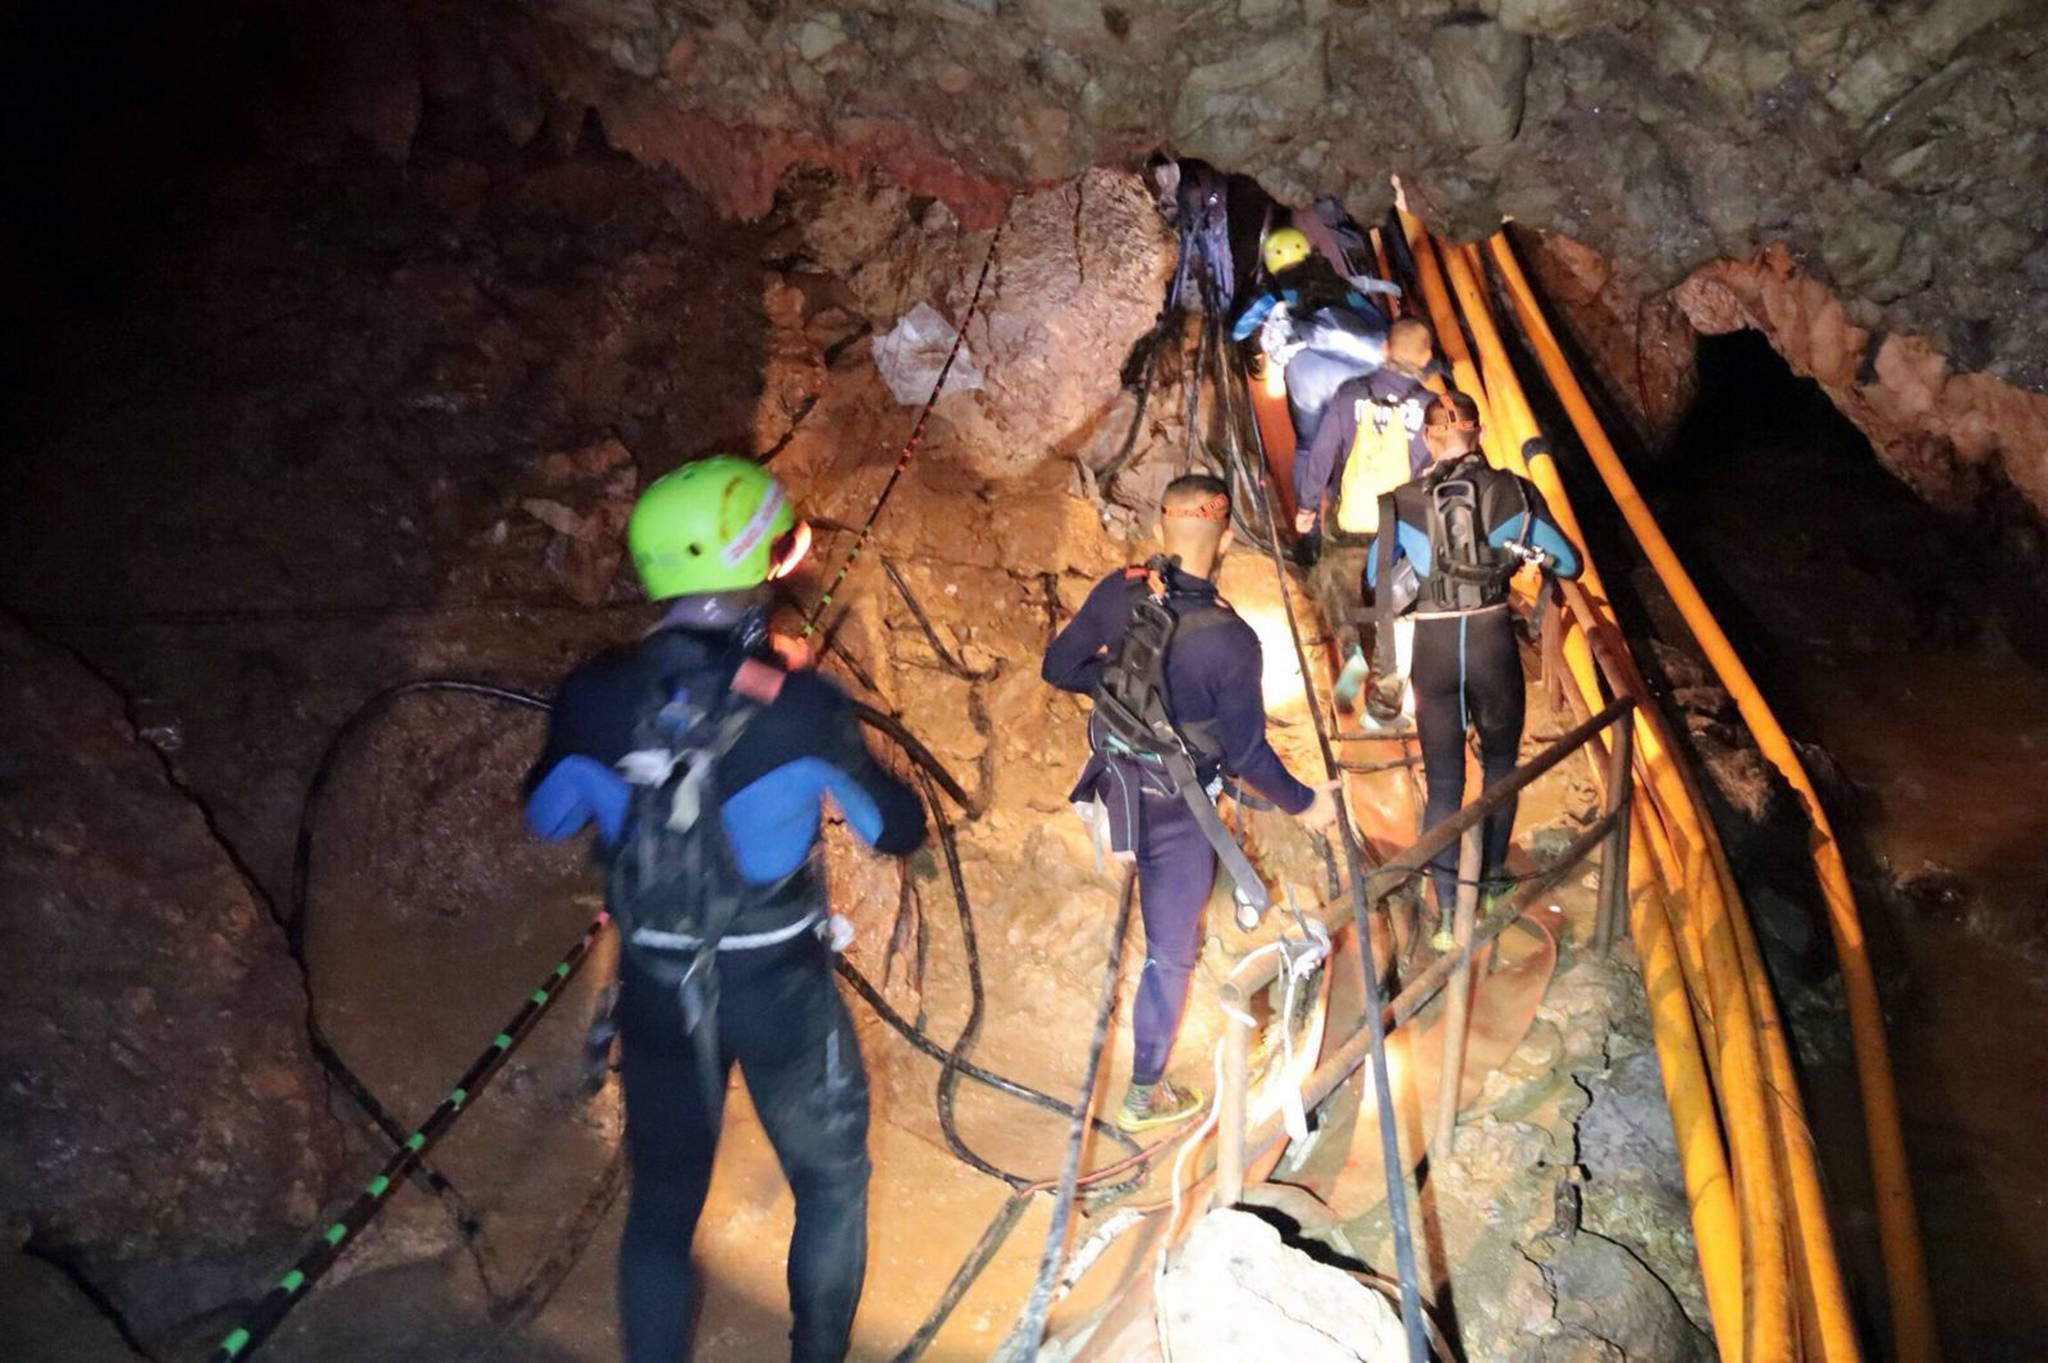 In this undated photo released by Royal Thai Navy on Saturday, July 7, 2018, Thai rescue team members walk inside a cave where 12 boys and their soccer coach were trapped since June 23, in Mae Sai, Chiang Rai province, northern Thailand. (Royal Thai Navy via AP)